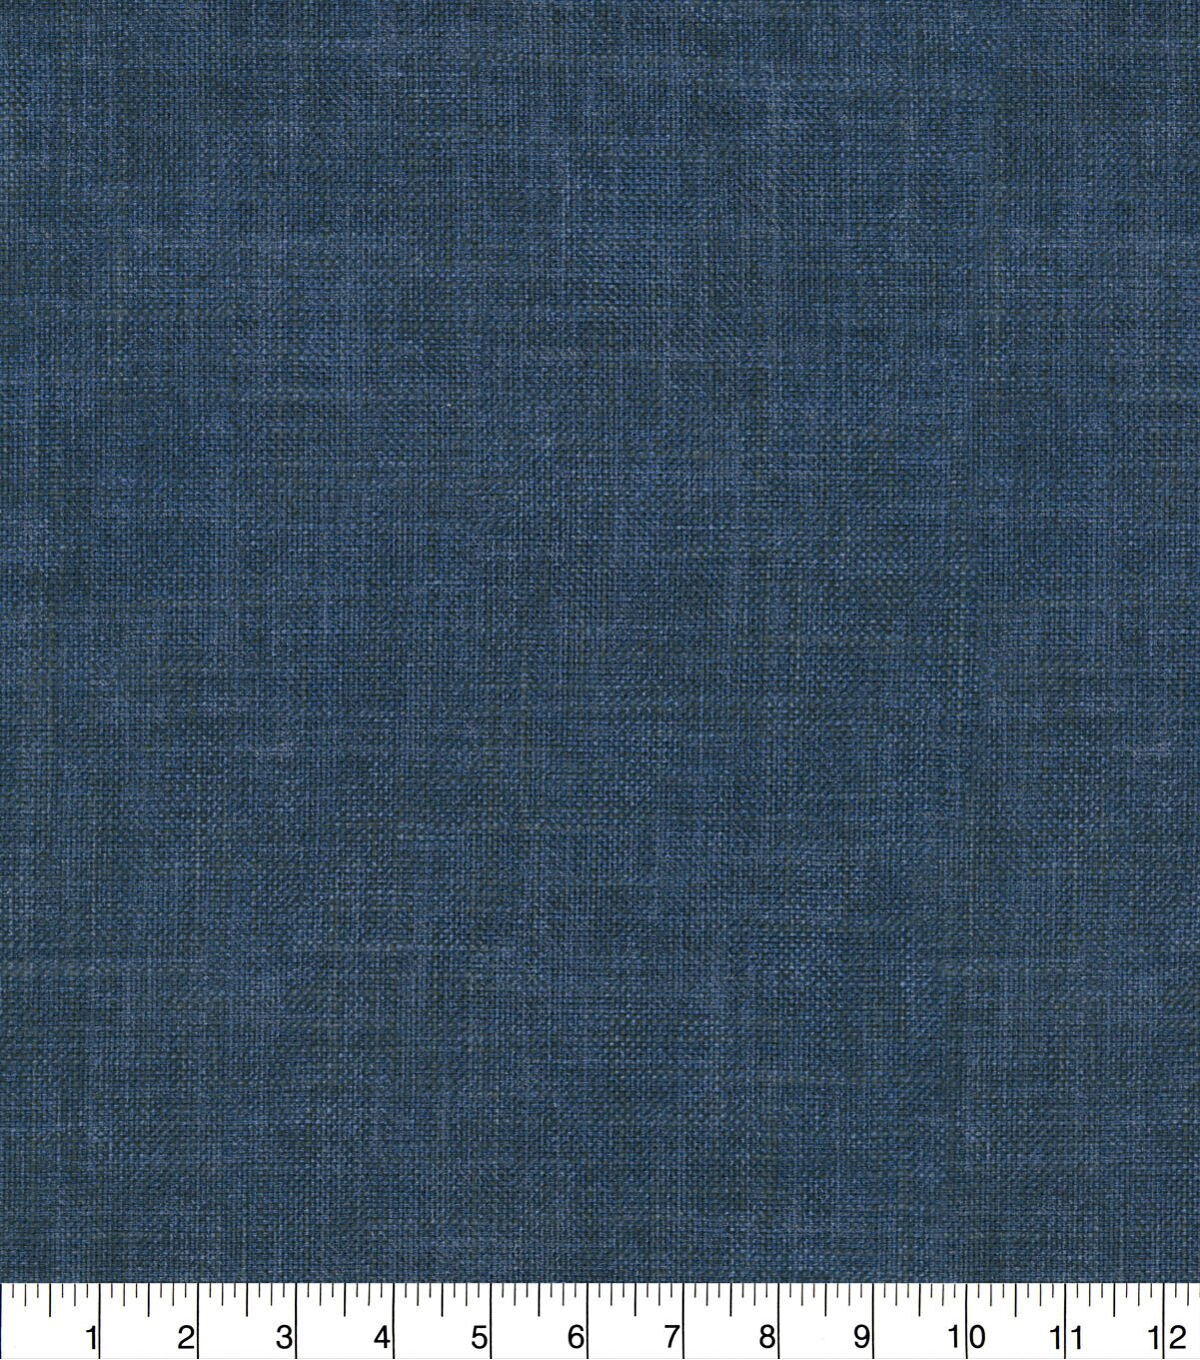 Amazon.com: 100% Cotton Denim Fabric by The Yard Stretch Denim Cloth Denim  Durable Denim Upholstery Fabric Perfect for Upholstery, Slipcovers,  Pillows, Window Breathable Denim Fabric : Arts, Crafts & Sewing